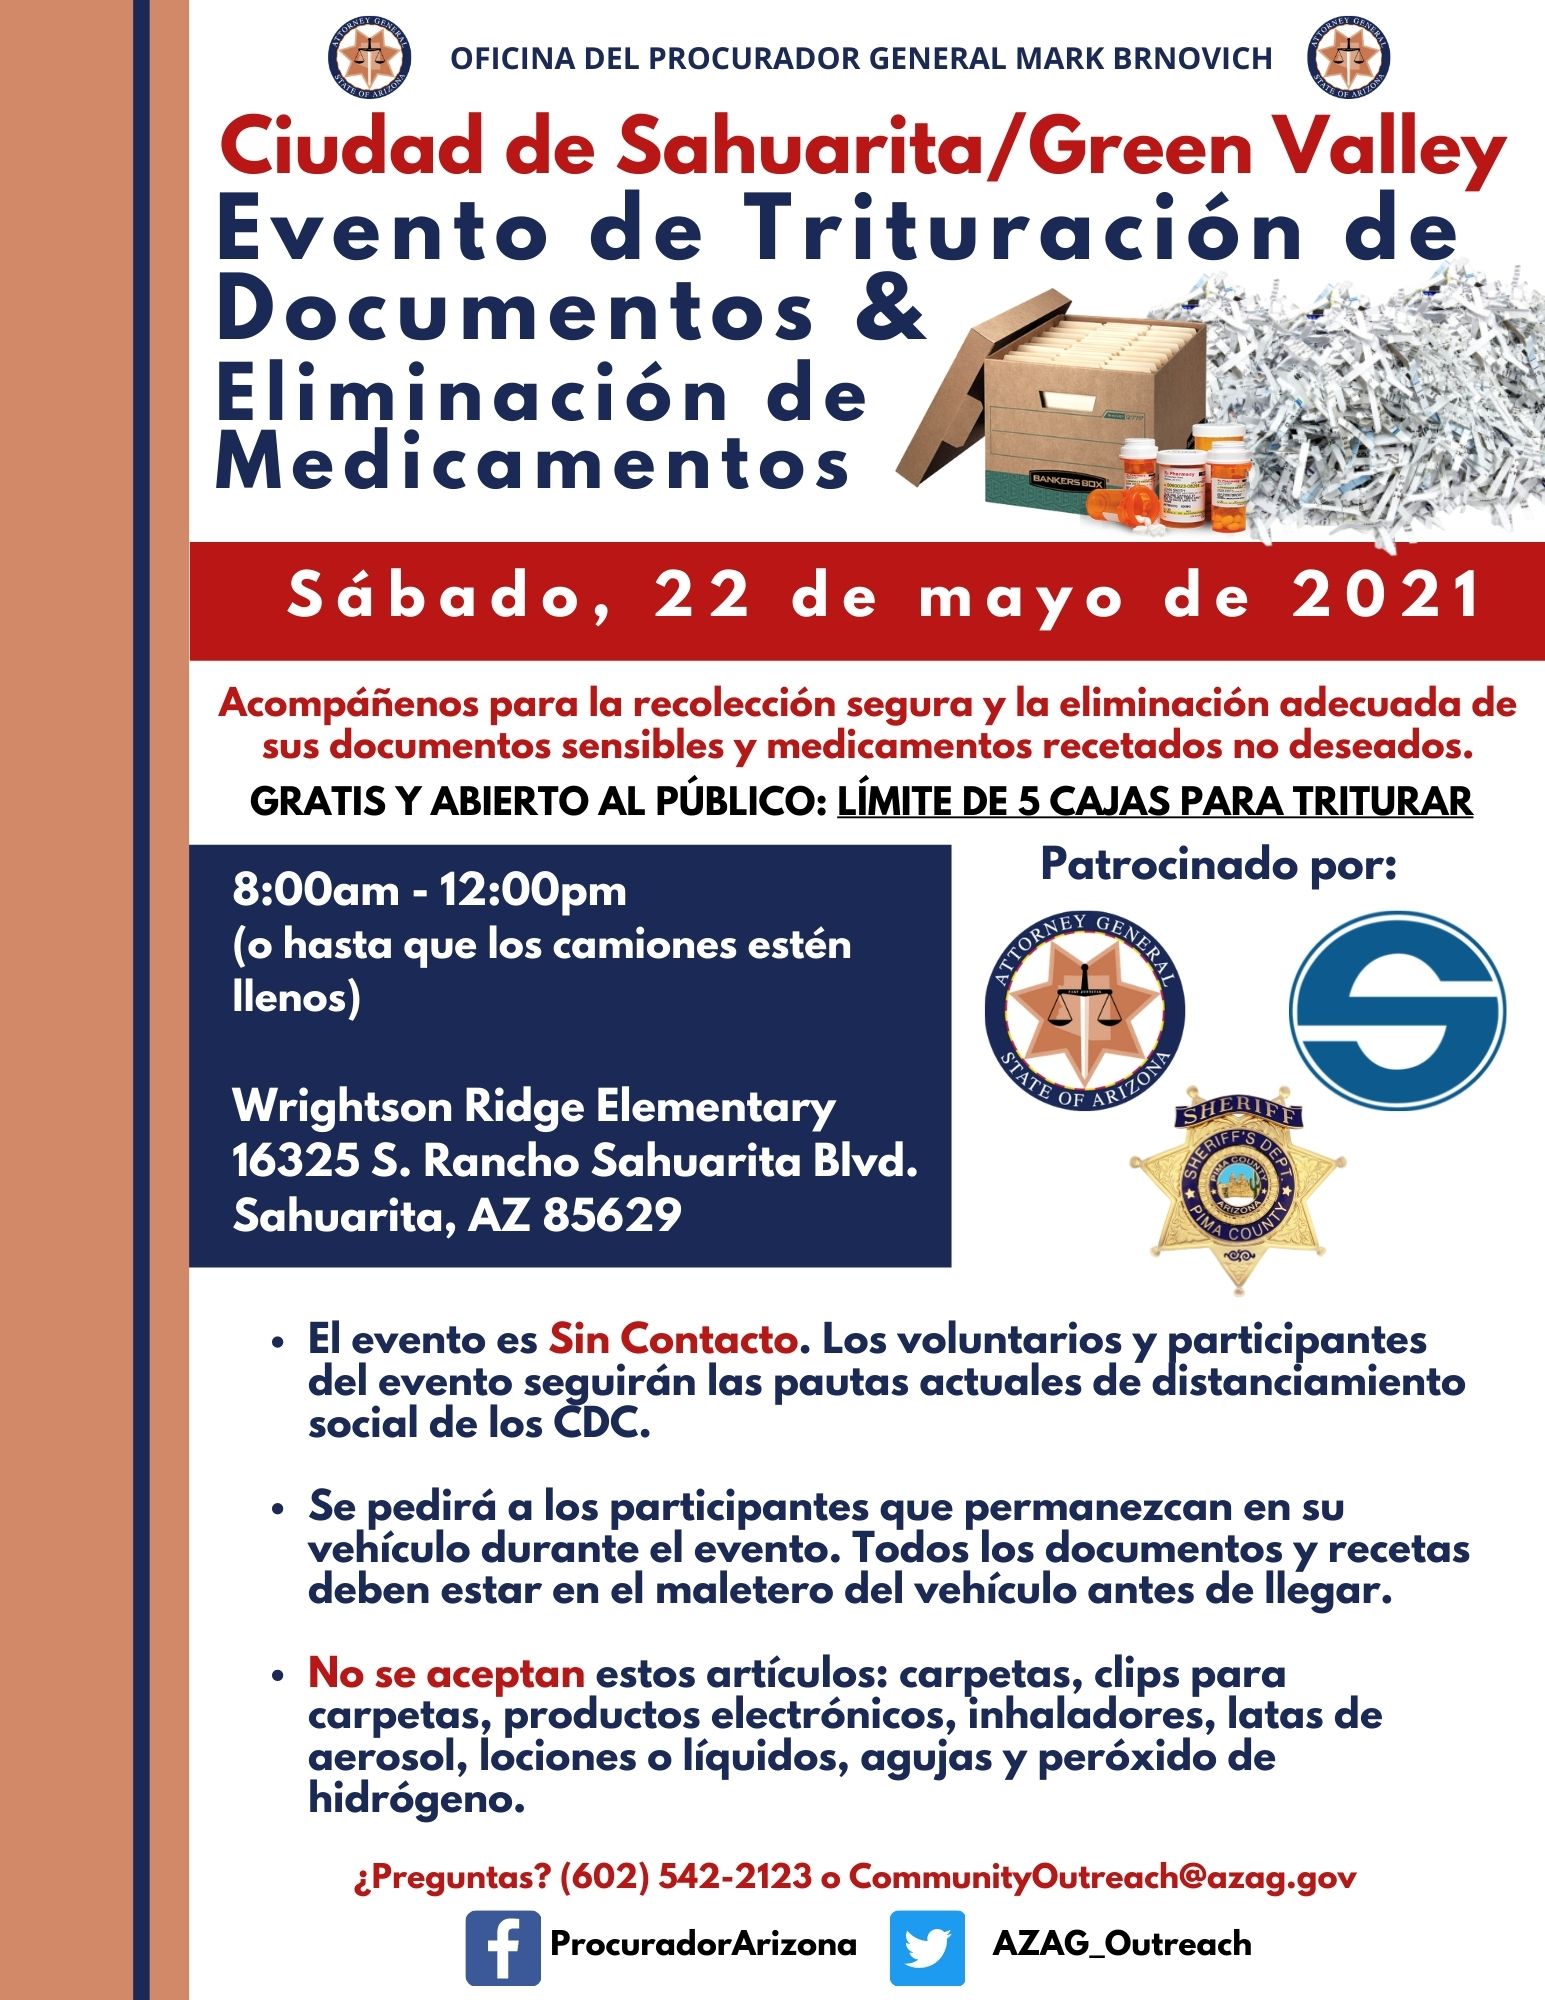 Event flyer in Spanish